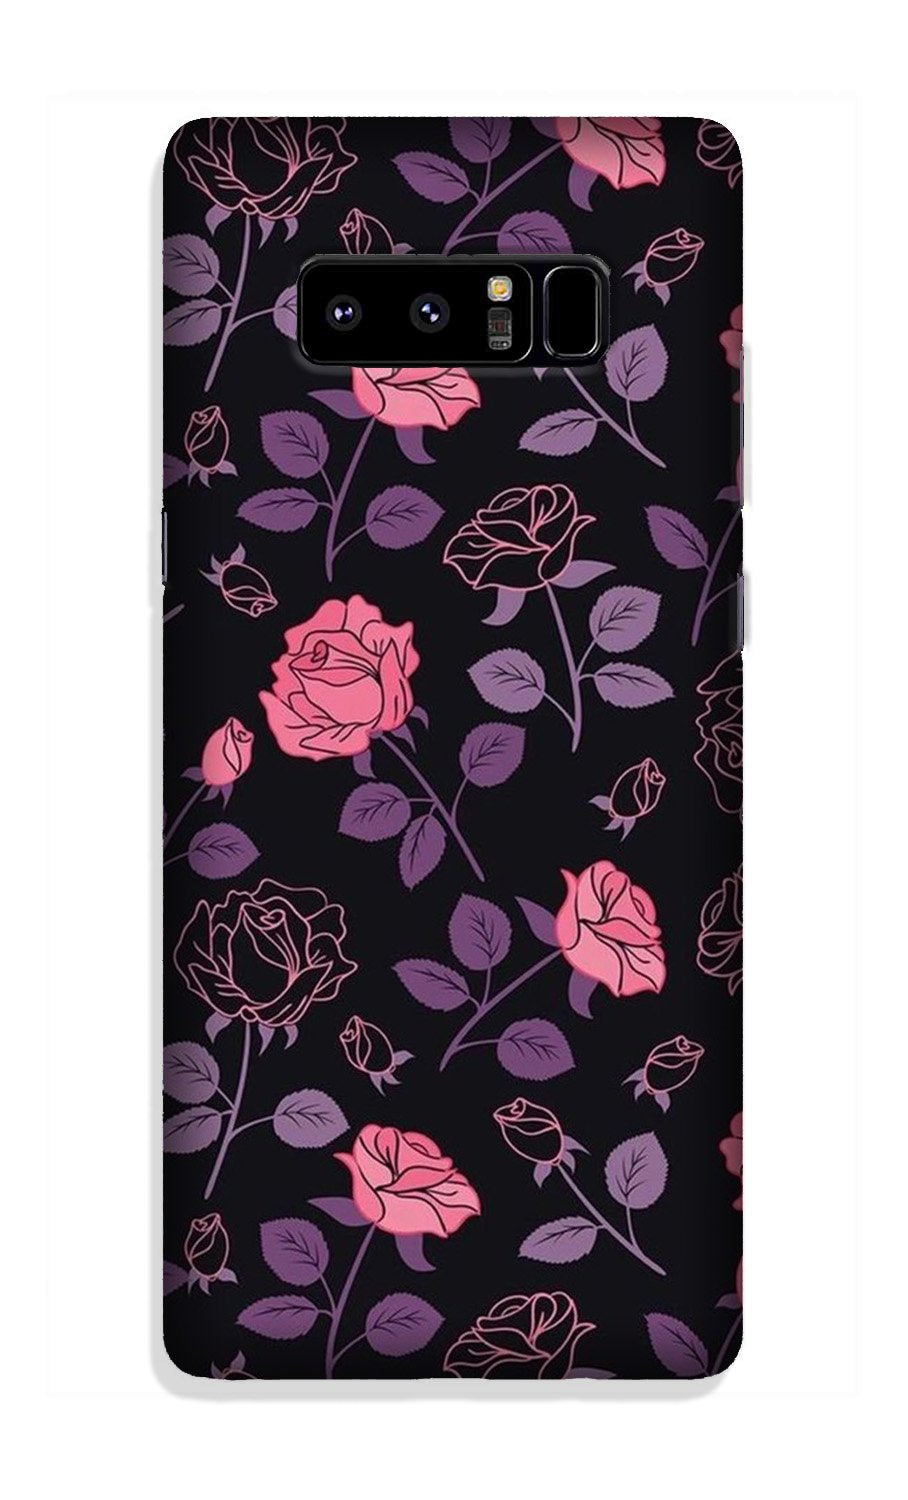 Rose Pattern Case for Galaxy Note 8